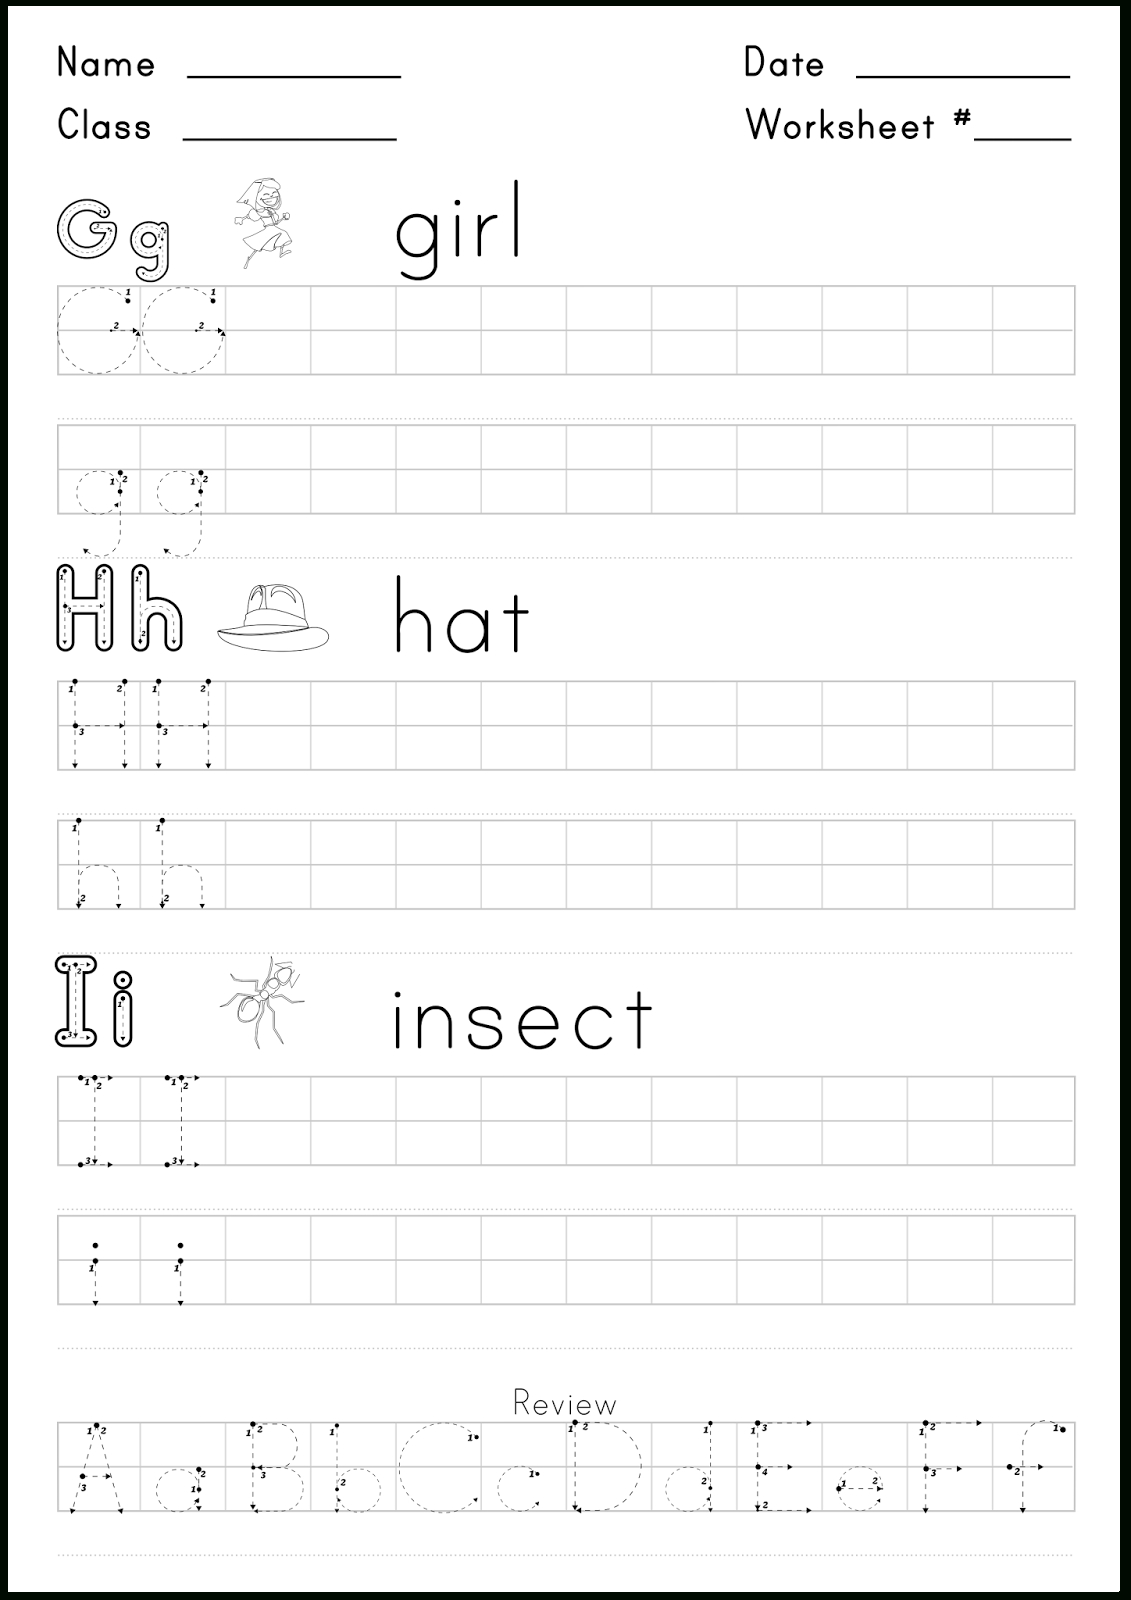 Worksheet For Writing The Letters G,h, And I. - Super with Alphabet Worksheets H